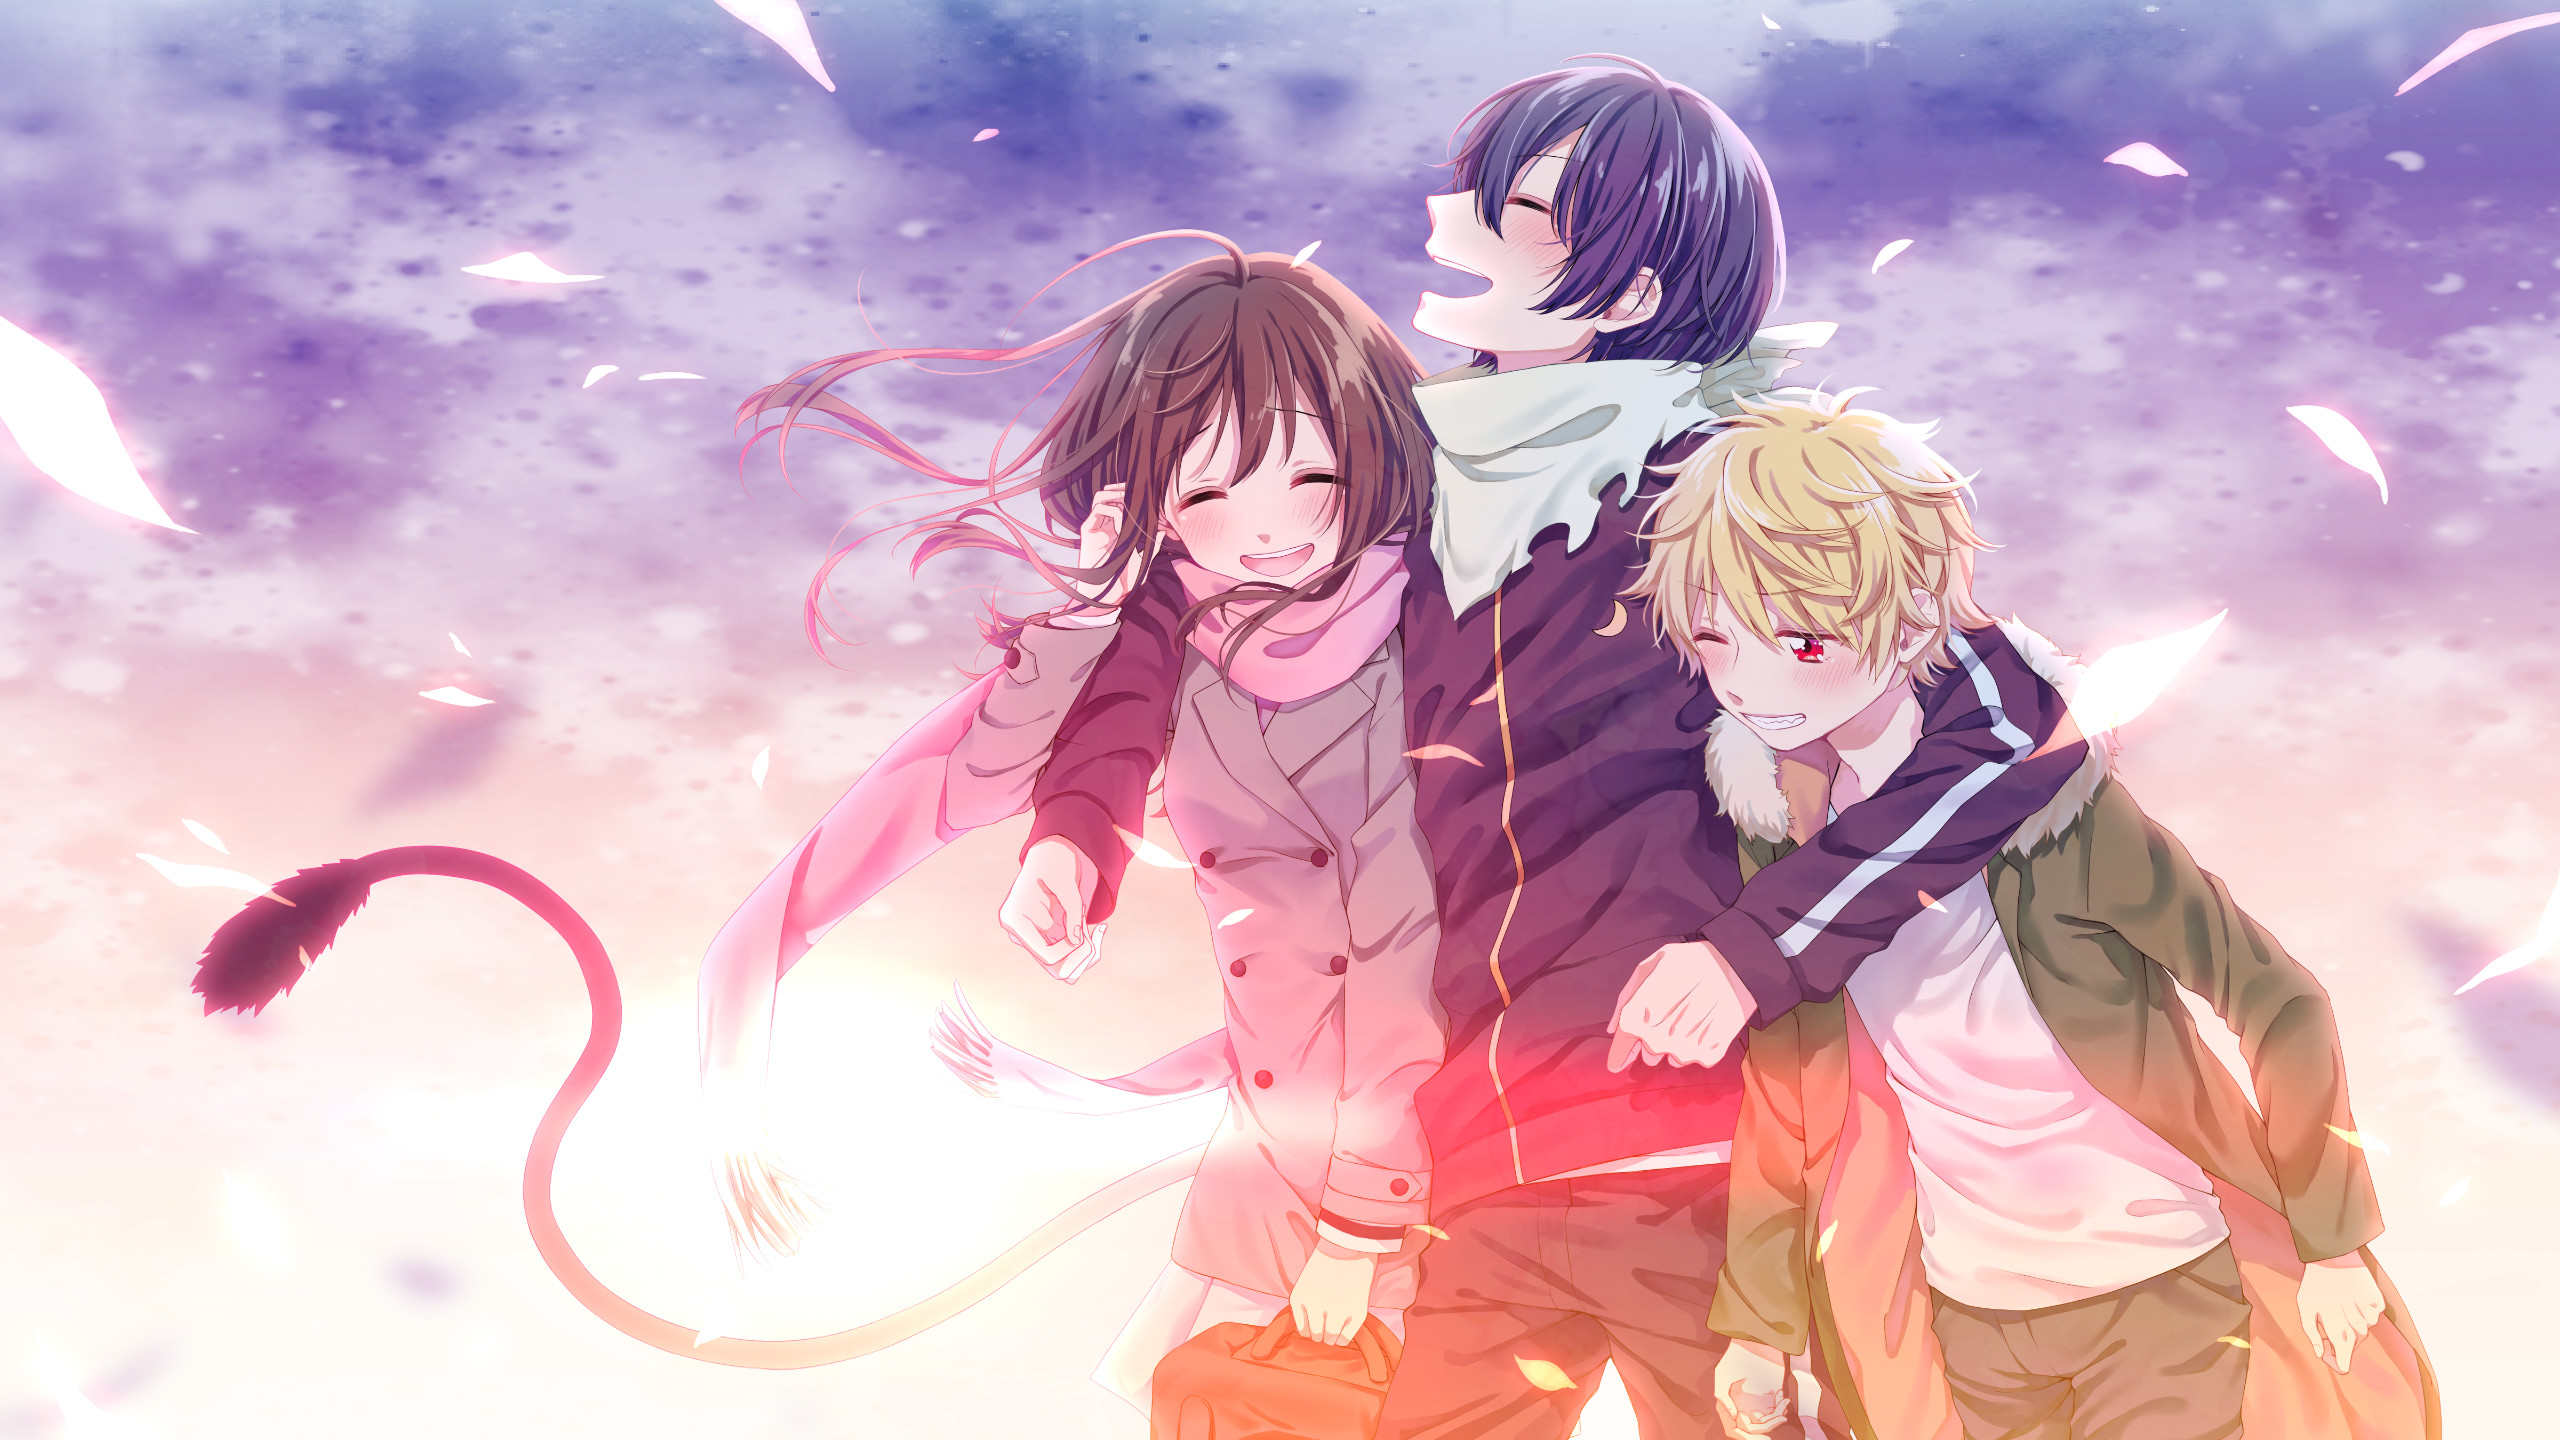 HD Wallpaper Background ID701082. Anime Noragami